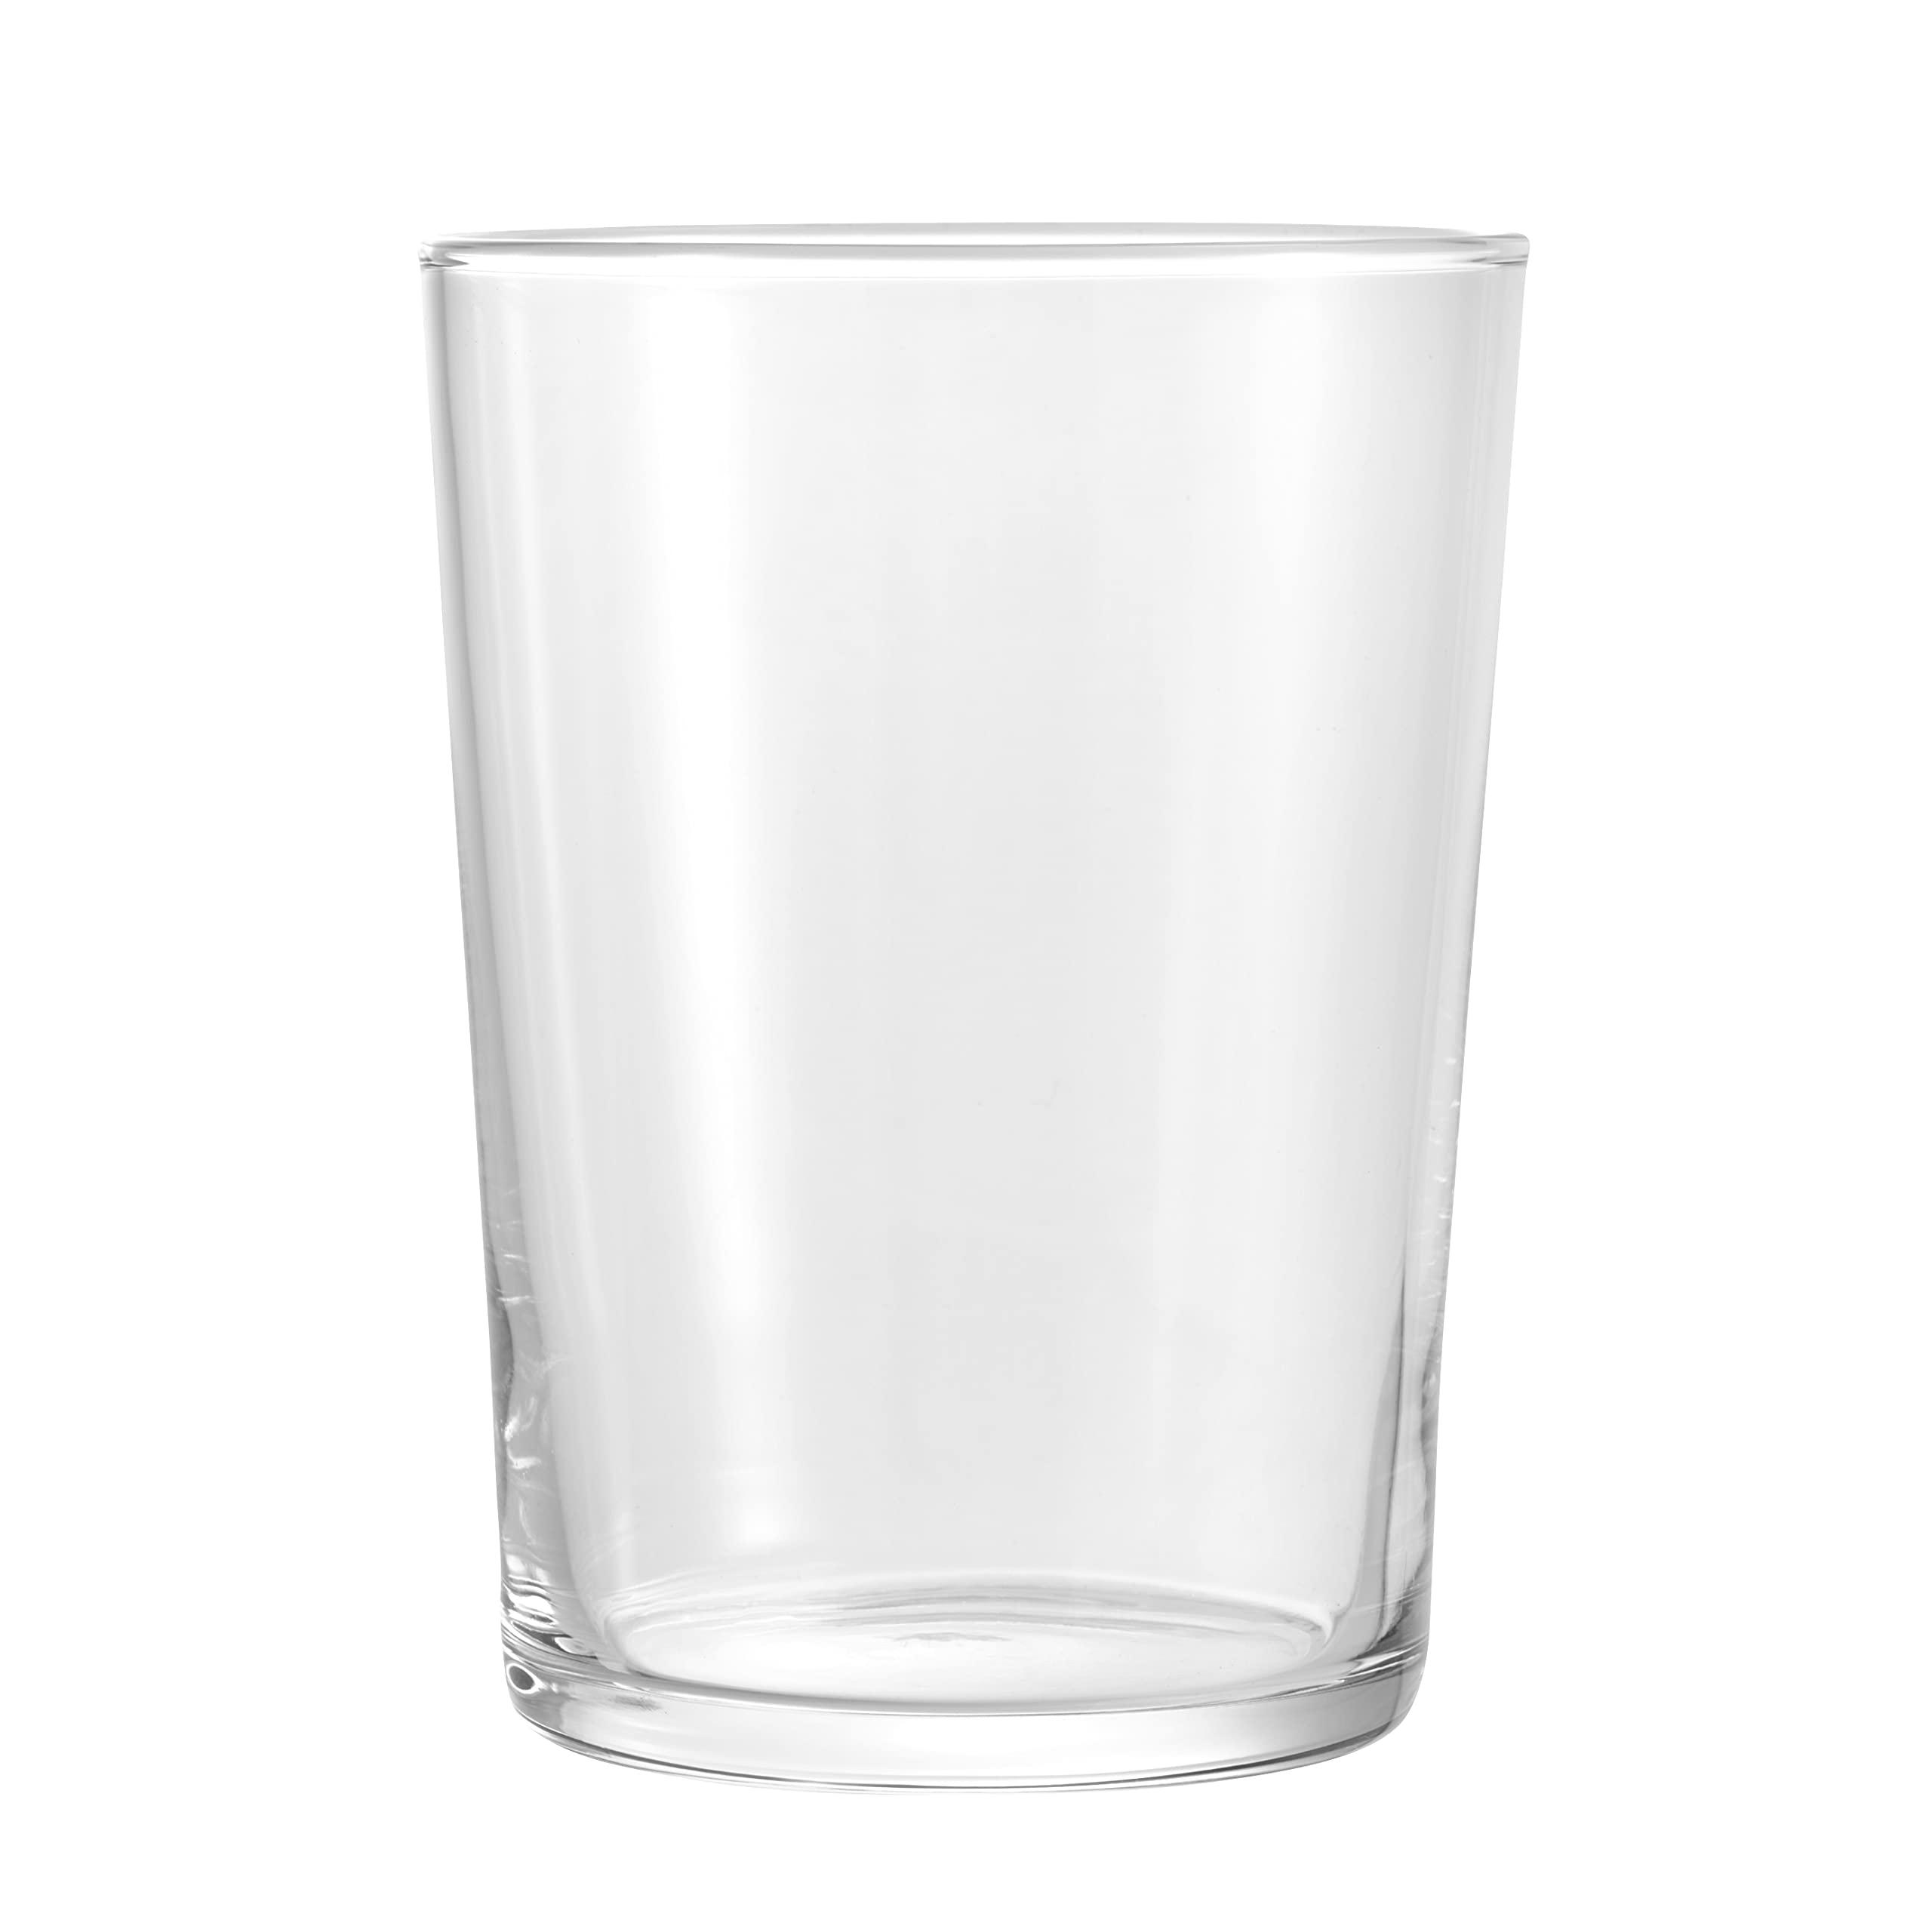 bormioli rocco bodega collection glassware - set of 12 maxi 17 ounce drinking glasses for water, beverages & cocktails - 17oz